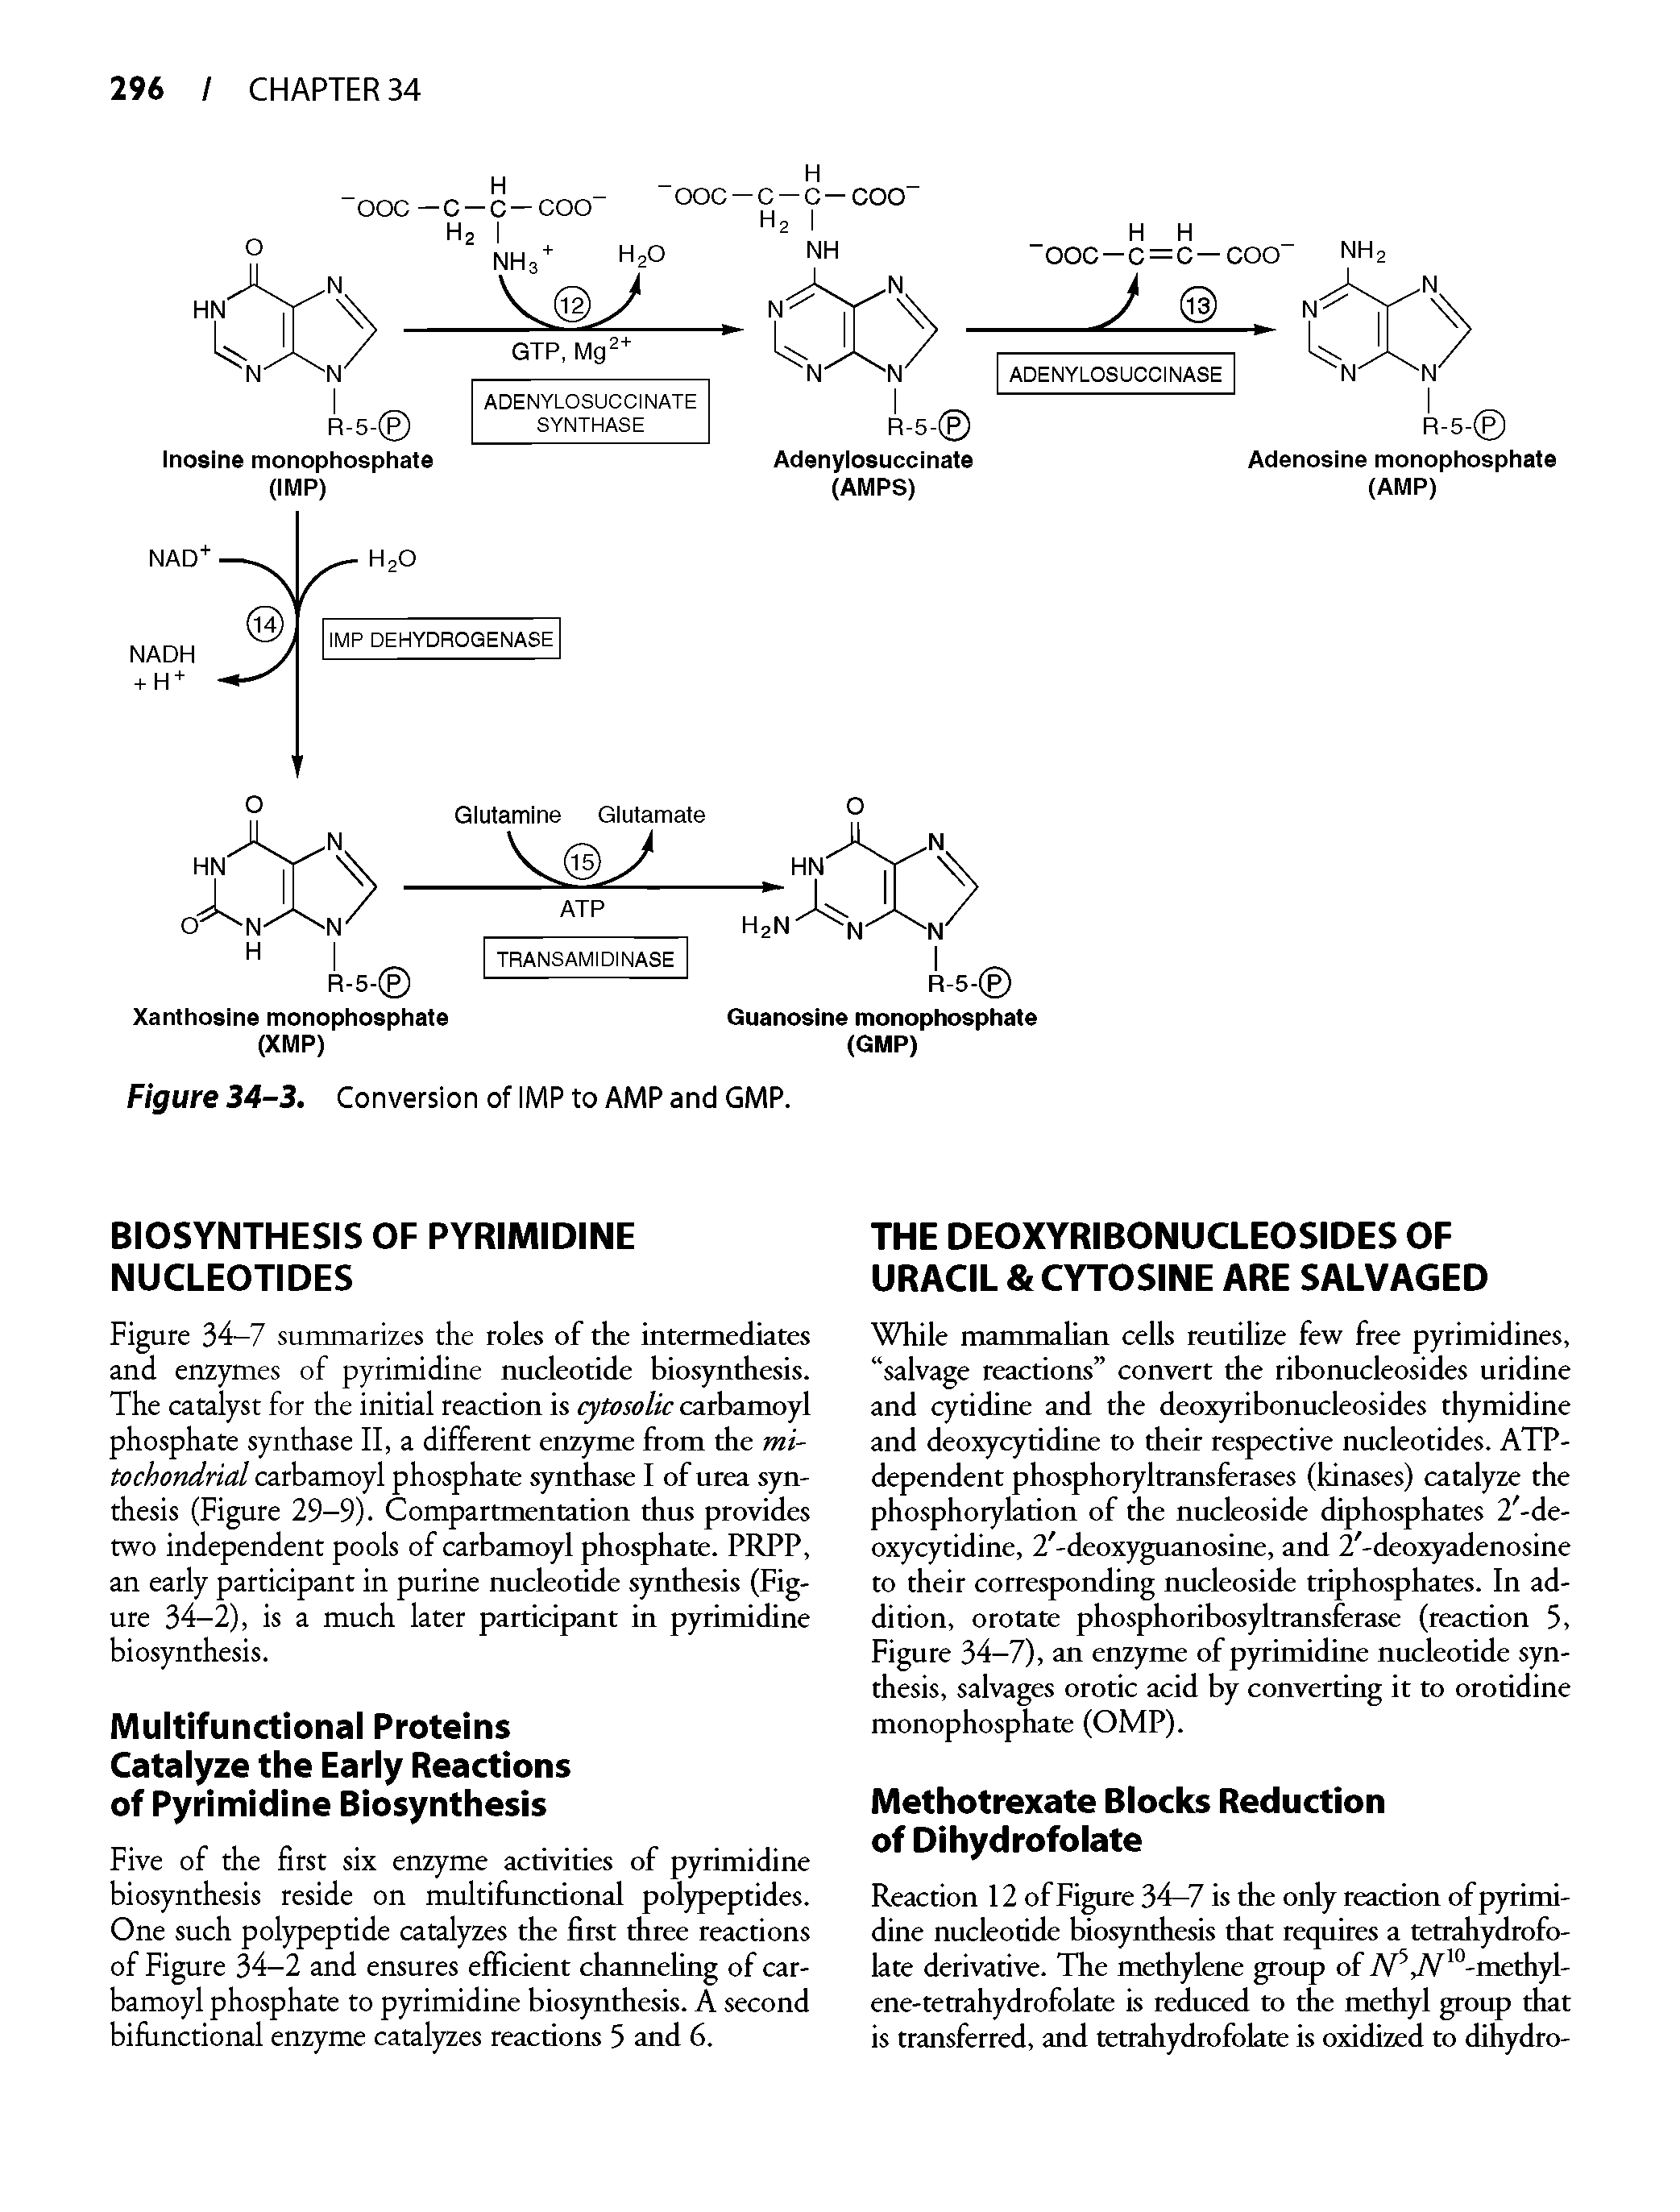 Figure 34-7 summarizes the roles of the intermediates and enzymes of pyrimidine nucleotide biosynthesis. The catalyst for the initial reaction is cytosolic carbamoyl phosphate synthase II, a different enzyme from the mitochondrial carbamoyl phosphate synthase I of urea synthesis (Figure 29-9). Compartmentation thus provides two independent pools of carbamoyl phosphate. PRPP, an early participant in purine nucleotide synthesis (Figure 34-2), is a much later participant in pyrimidine biosynthesis.